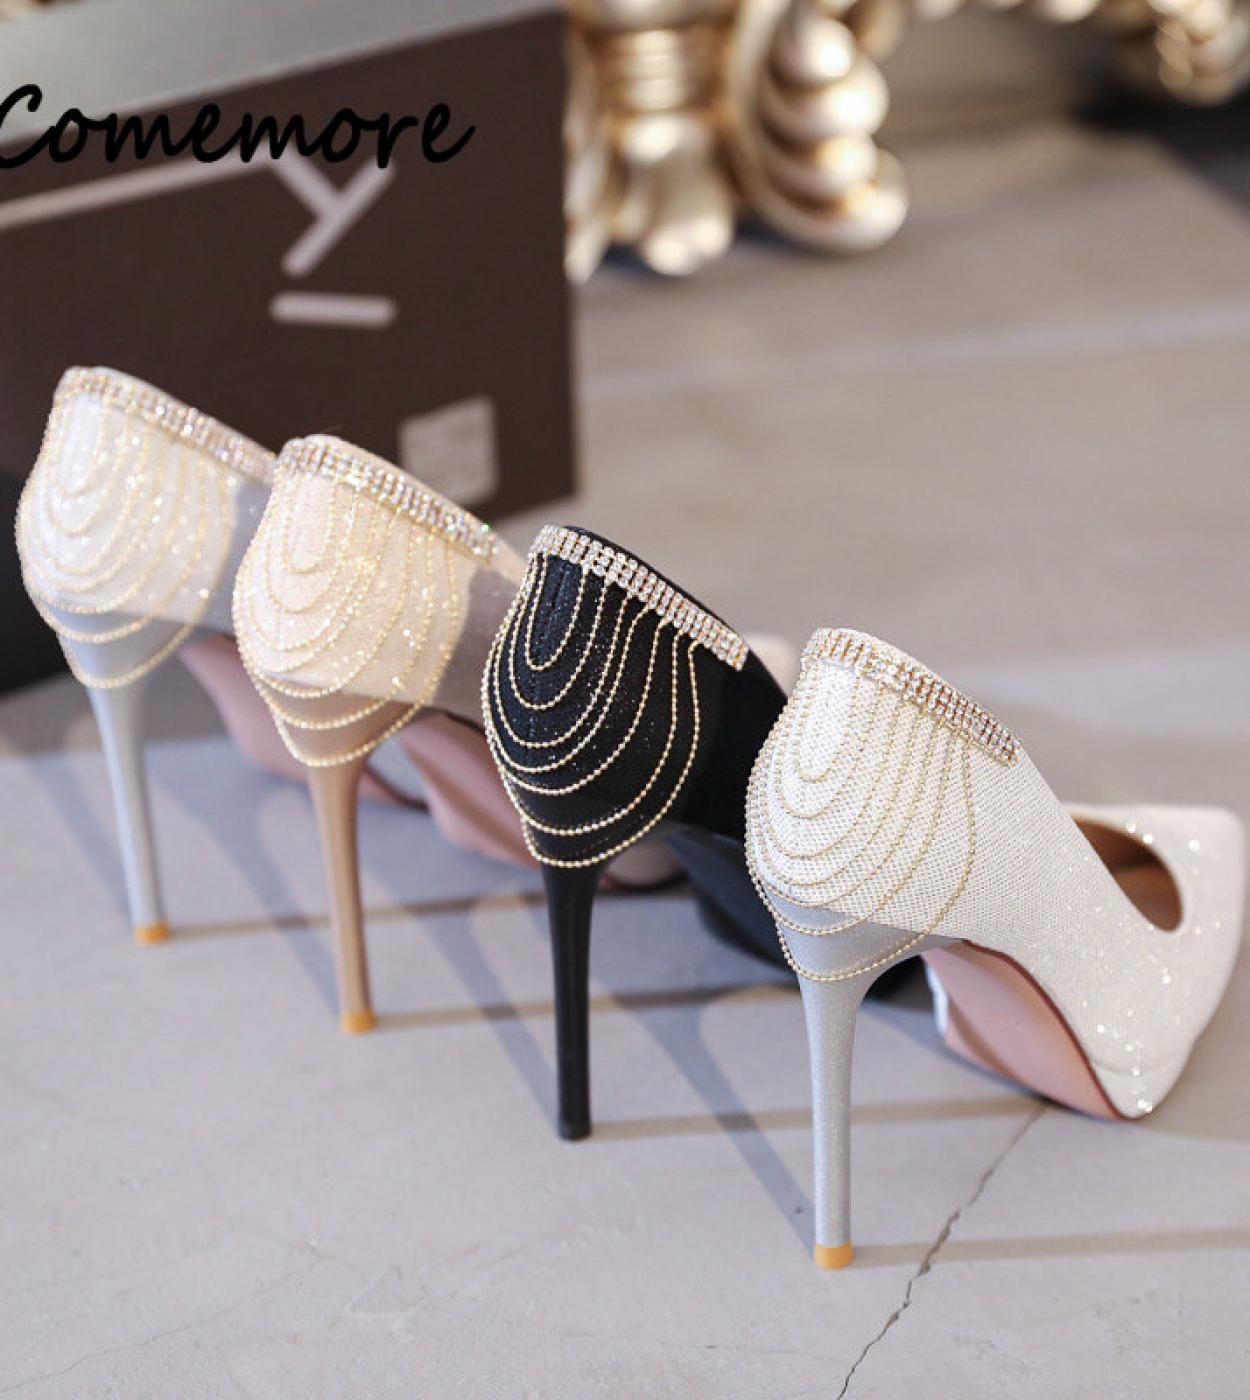 Comemore Spring New Super High Heels Shoe Elegant Ladies Stilettos Womens Pumps Pointed Black Wedding Shoes Evening Woma